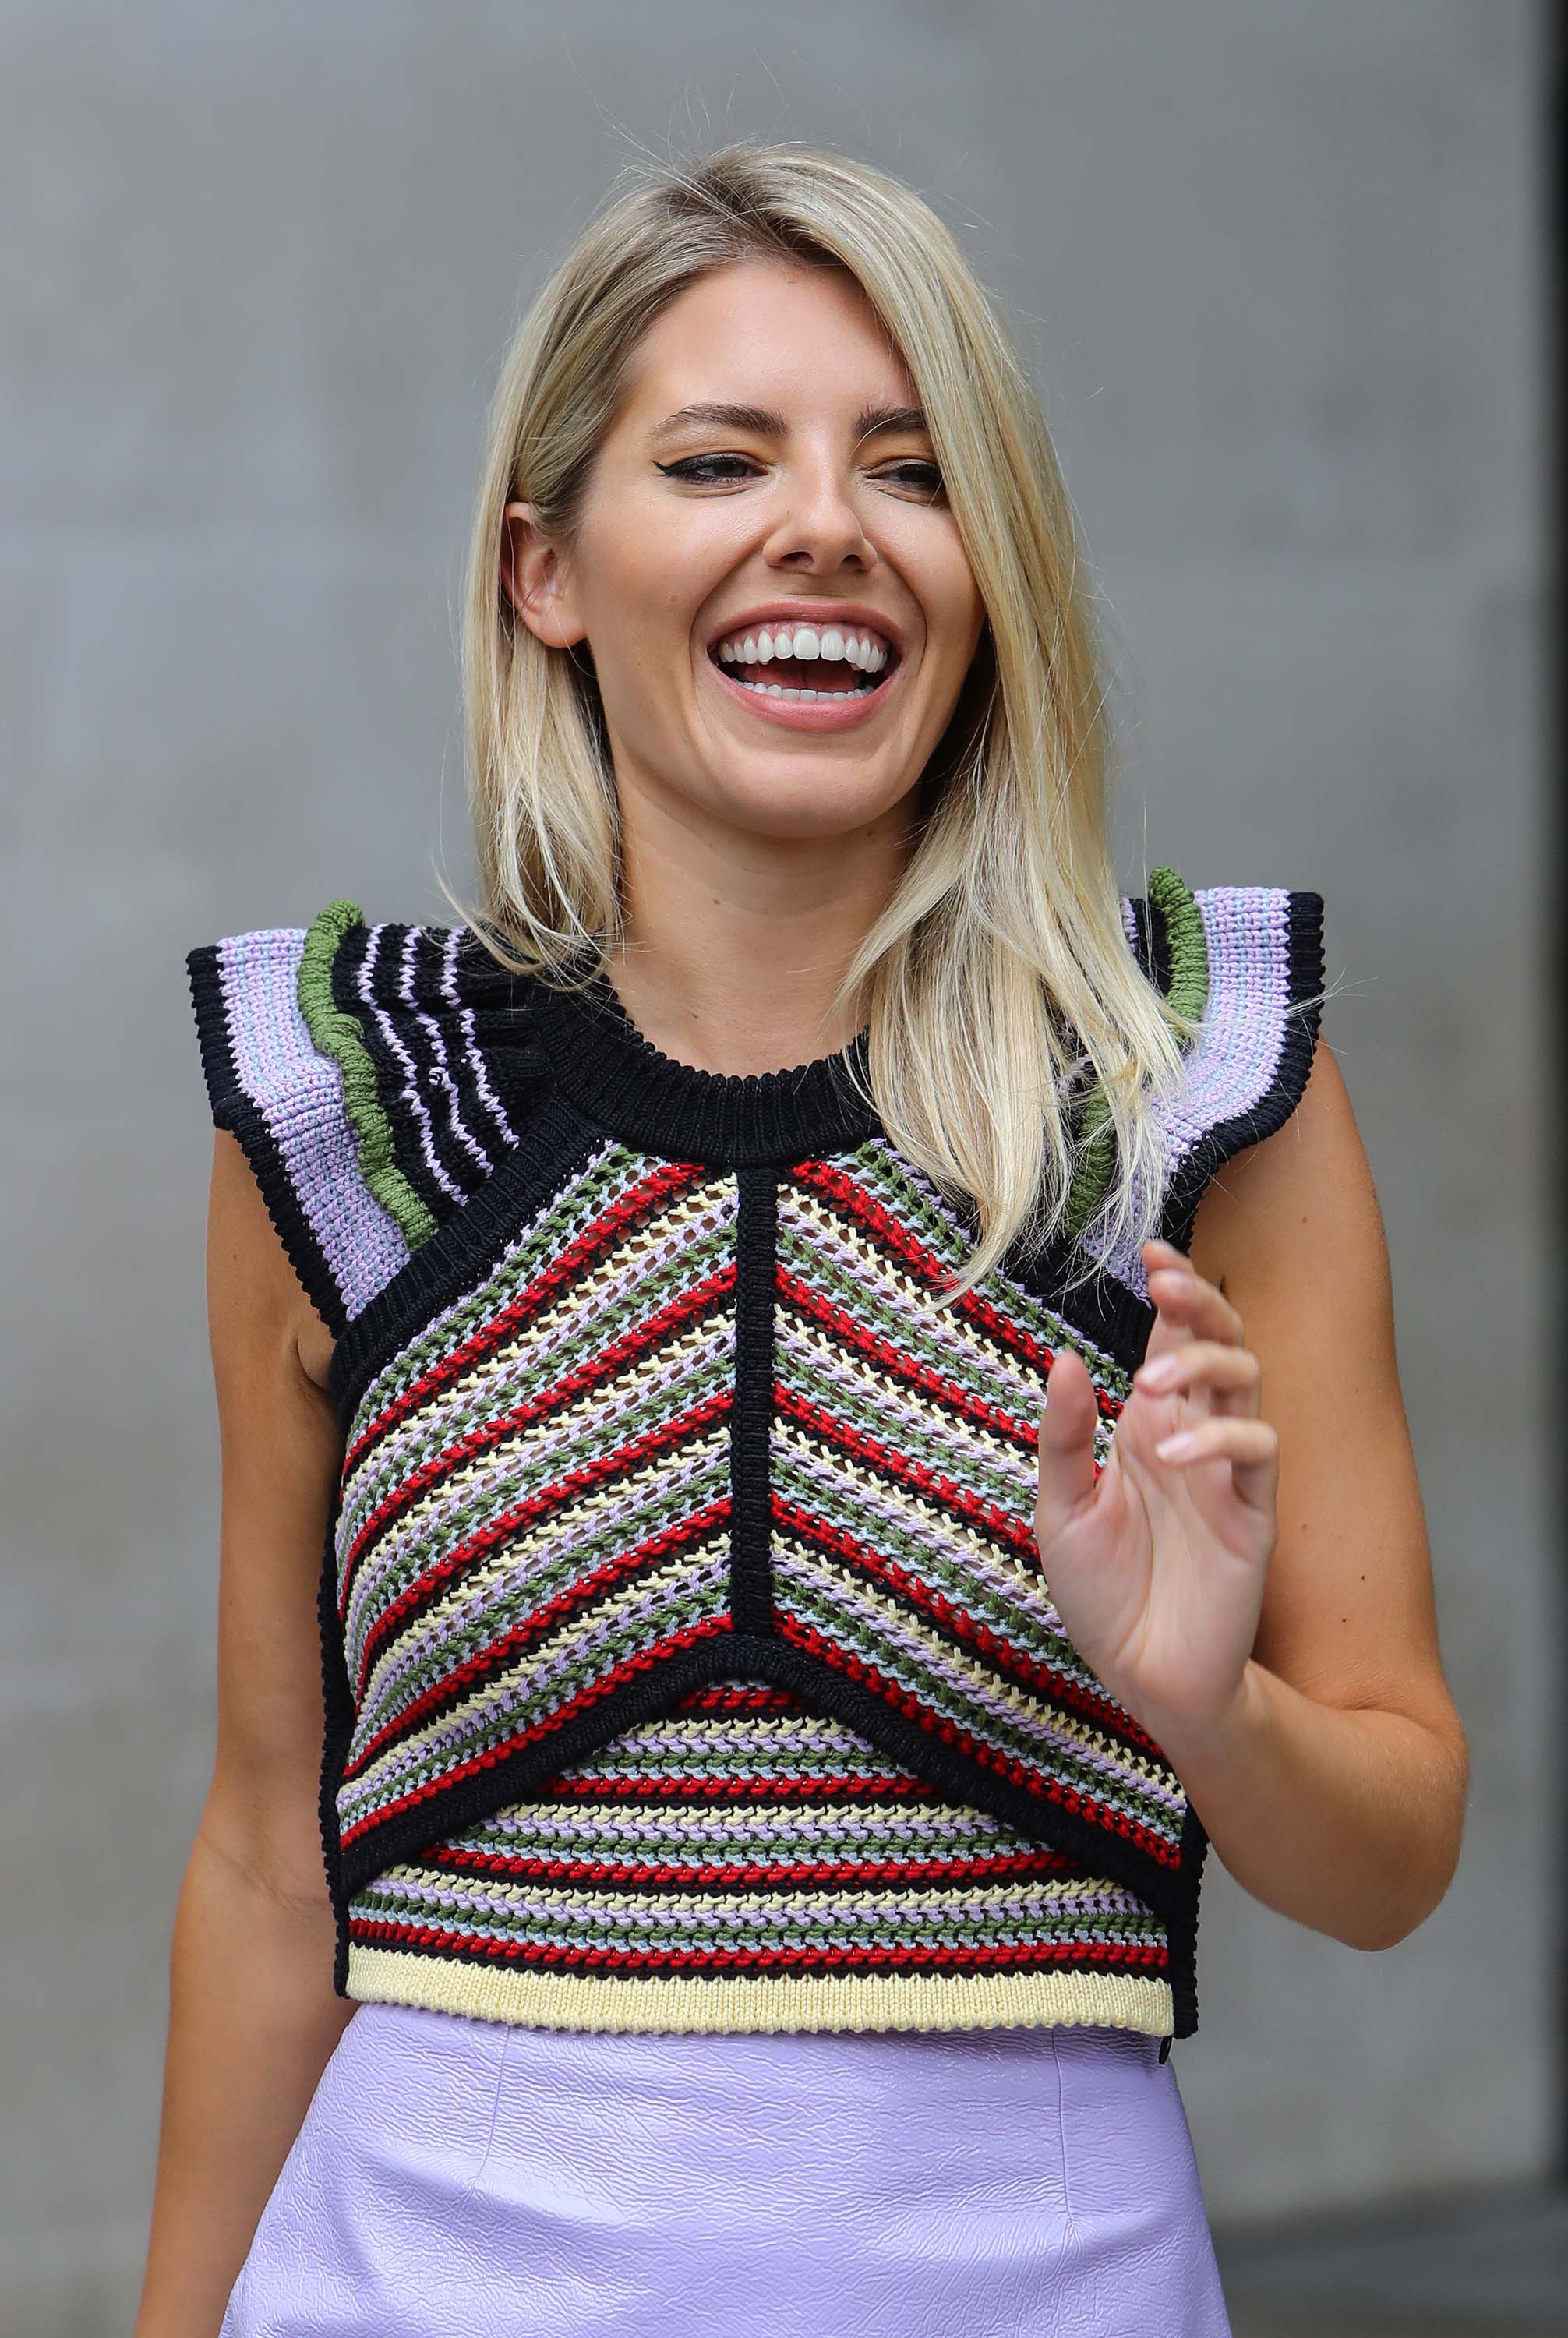 Mollie King seen at BBC Broadcasting House